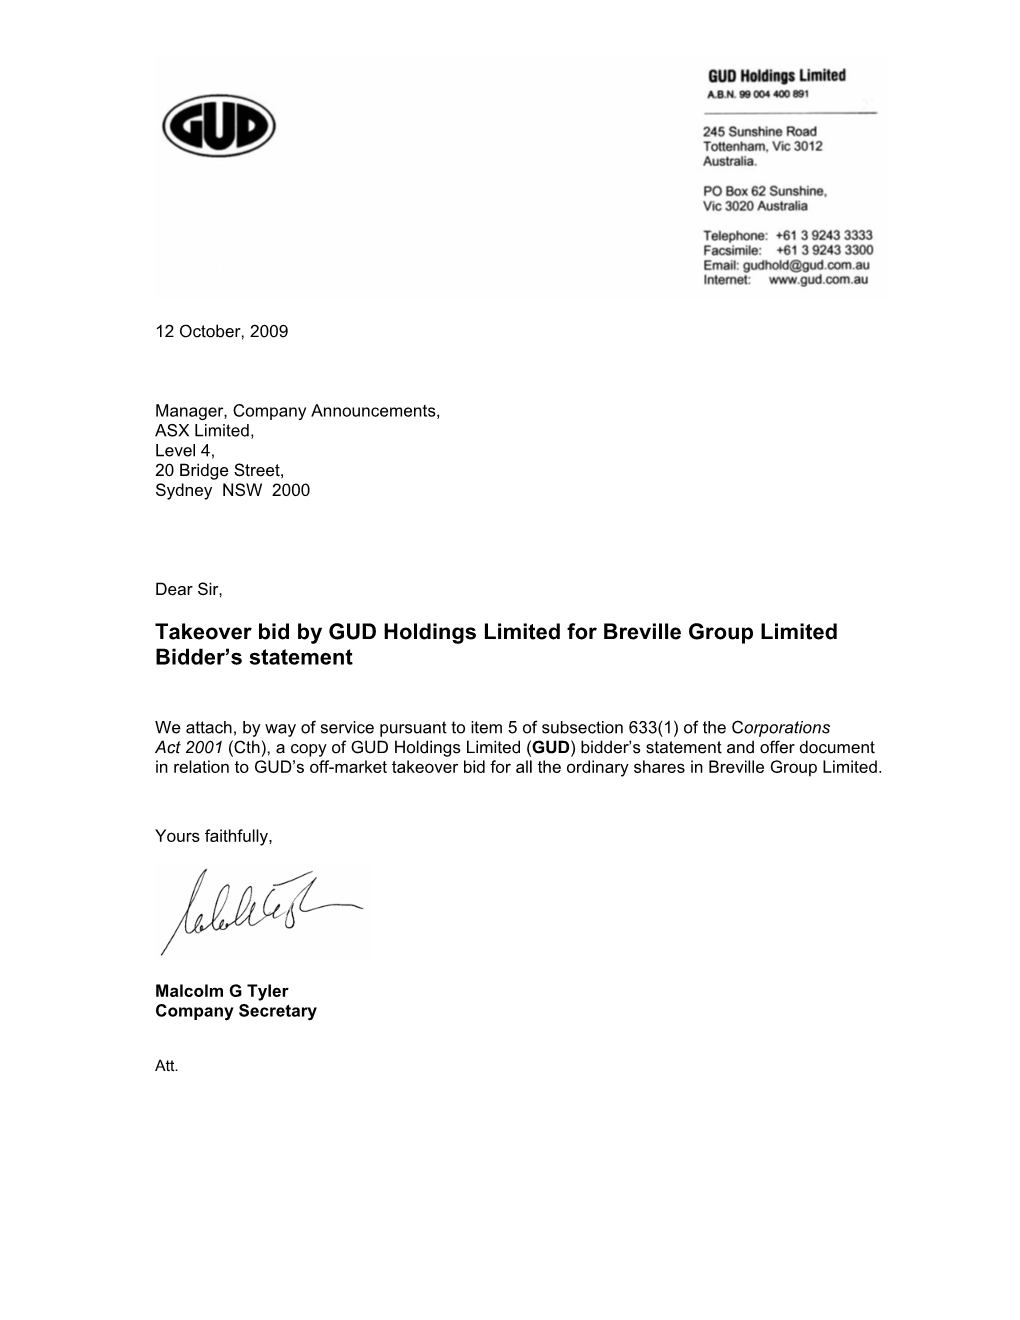 Takeover Bid by GUD Holdings Limited for Breville Group Limited Bidder's Statement